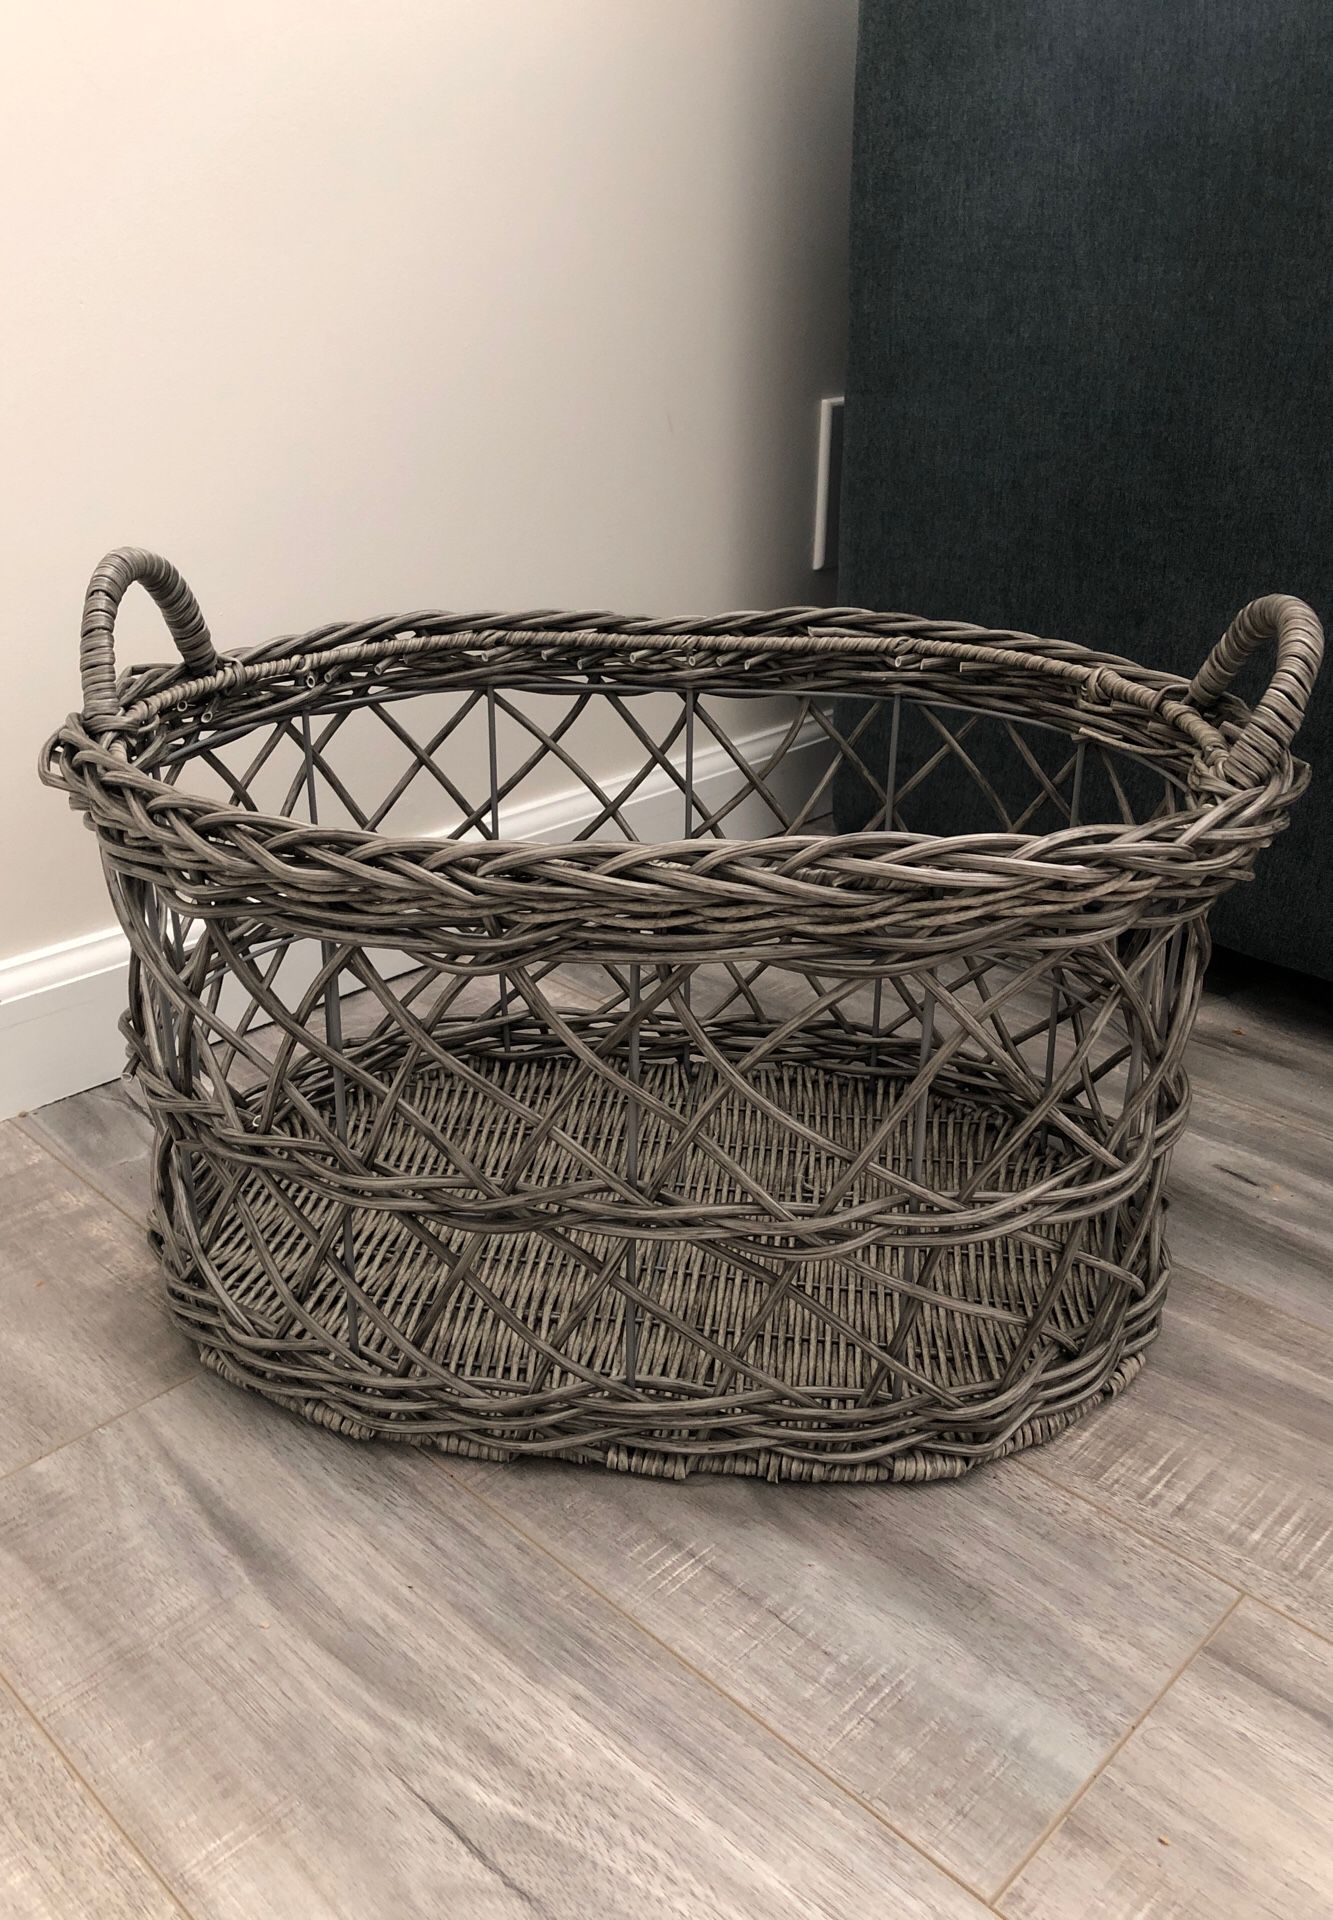 Basket for Throw Blankets